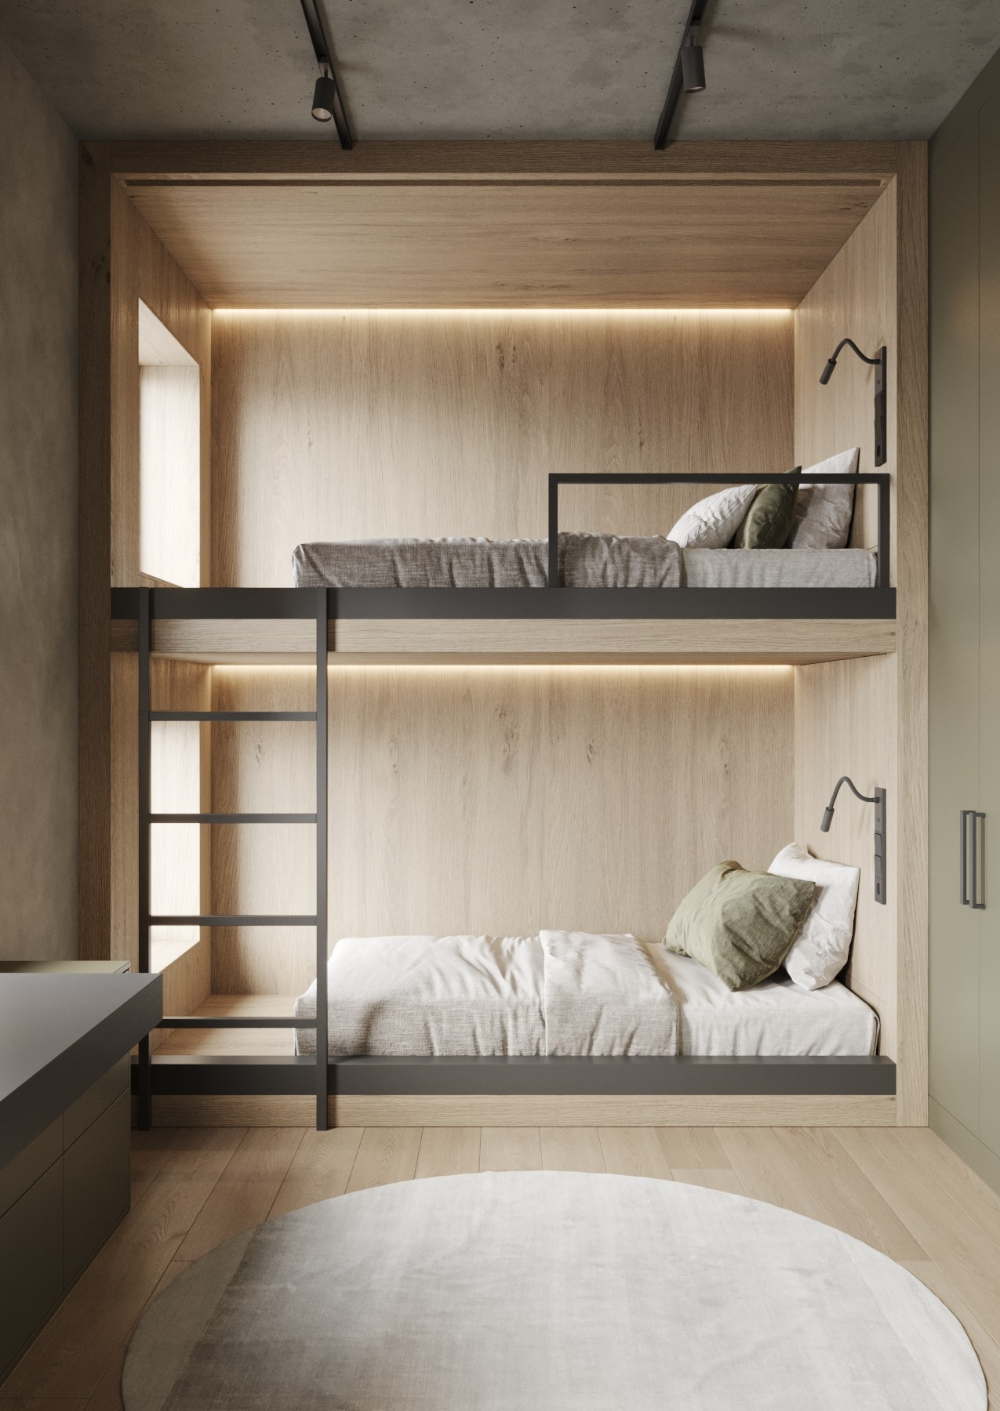 How to choose bunk beds for kids?